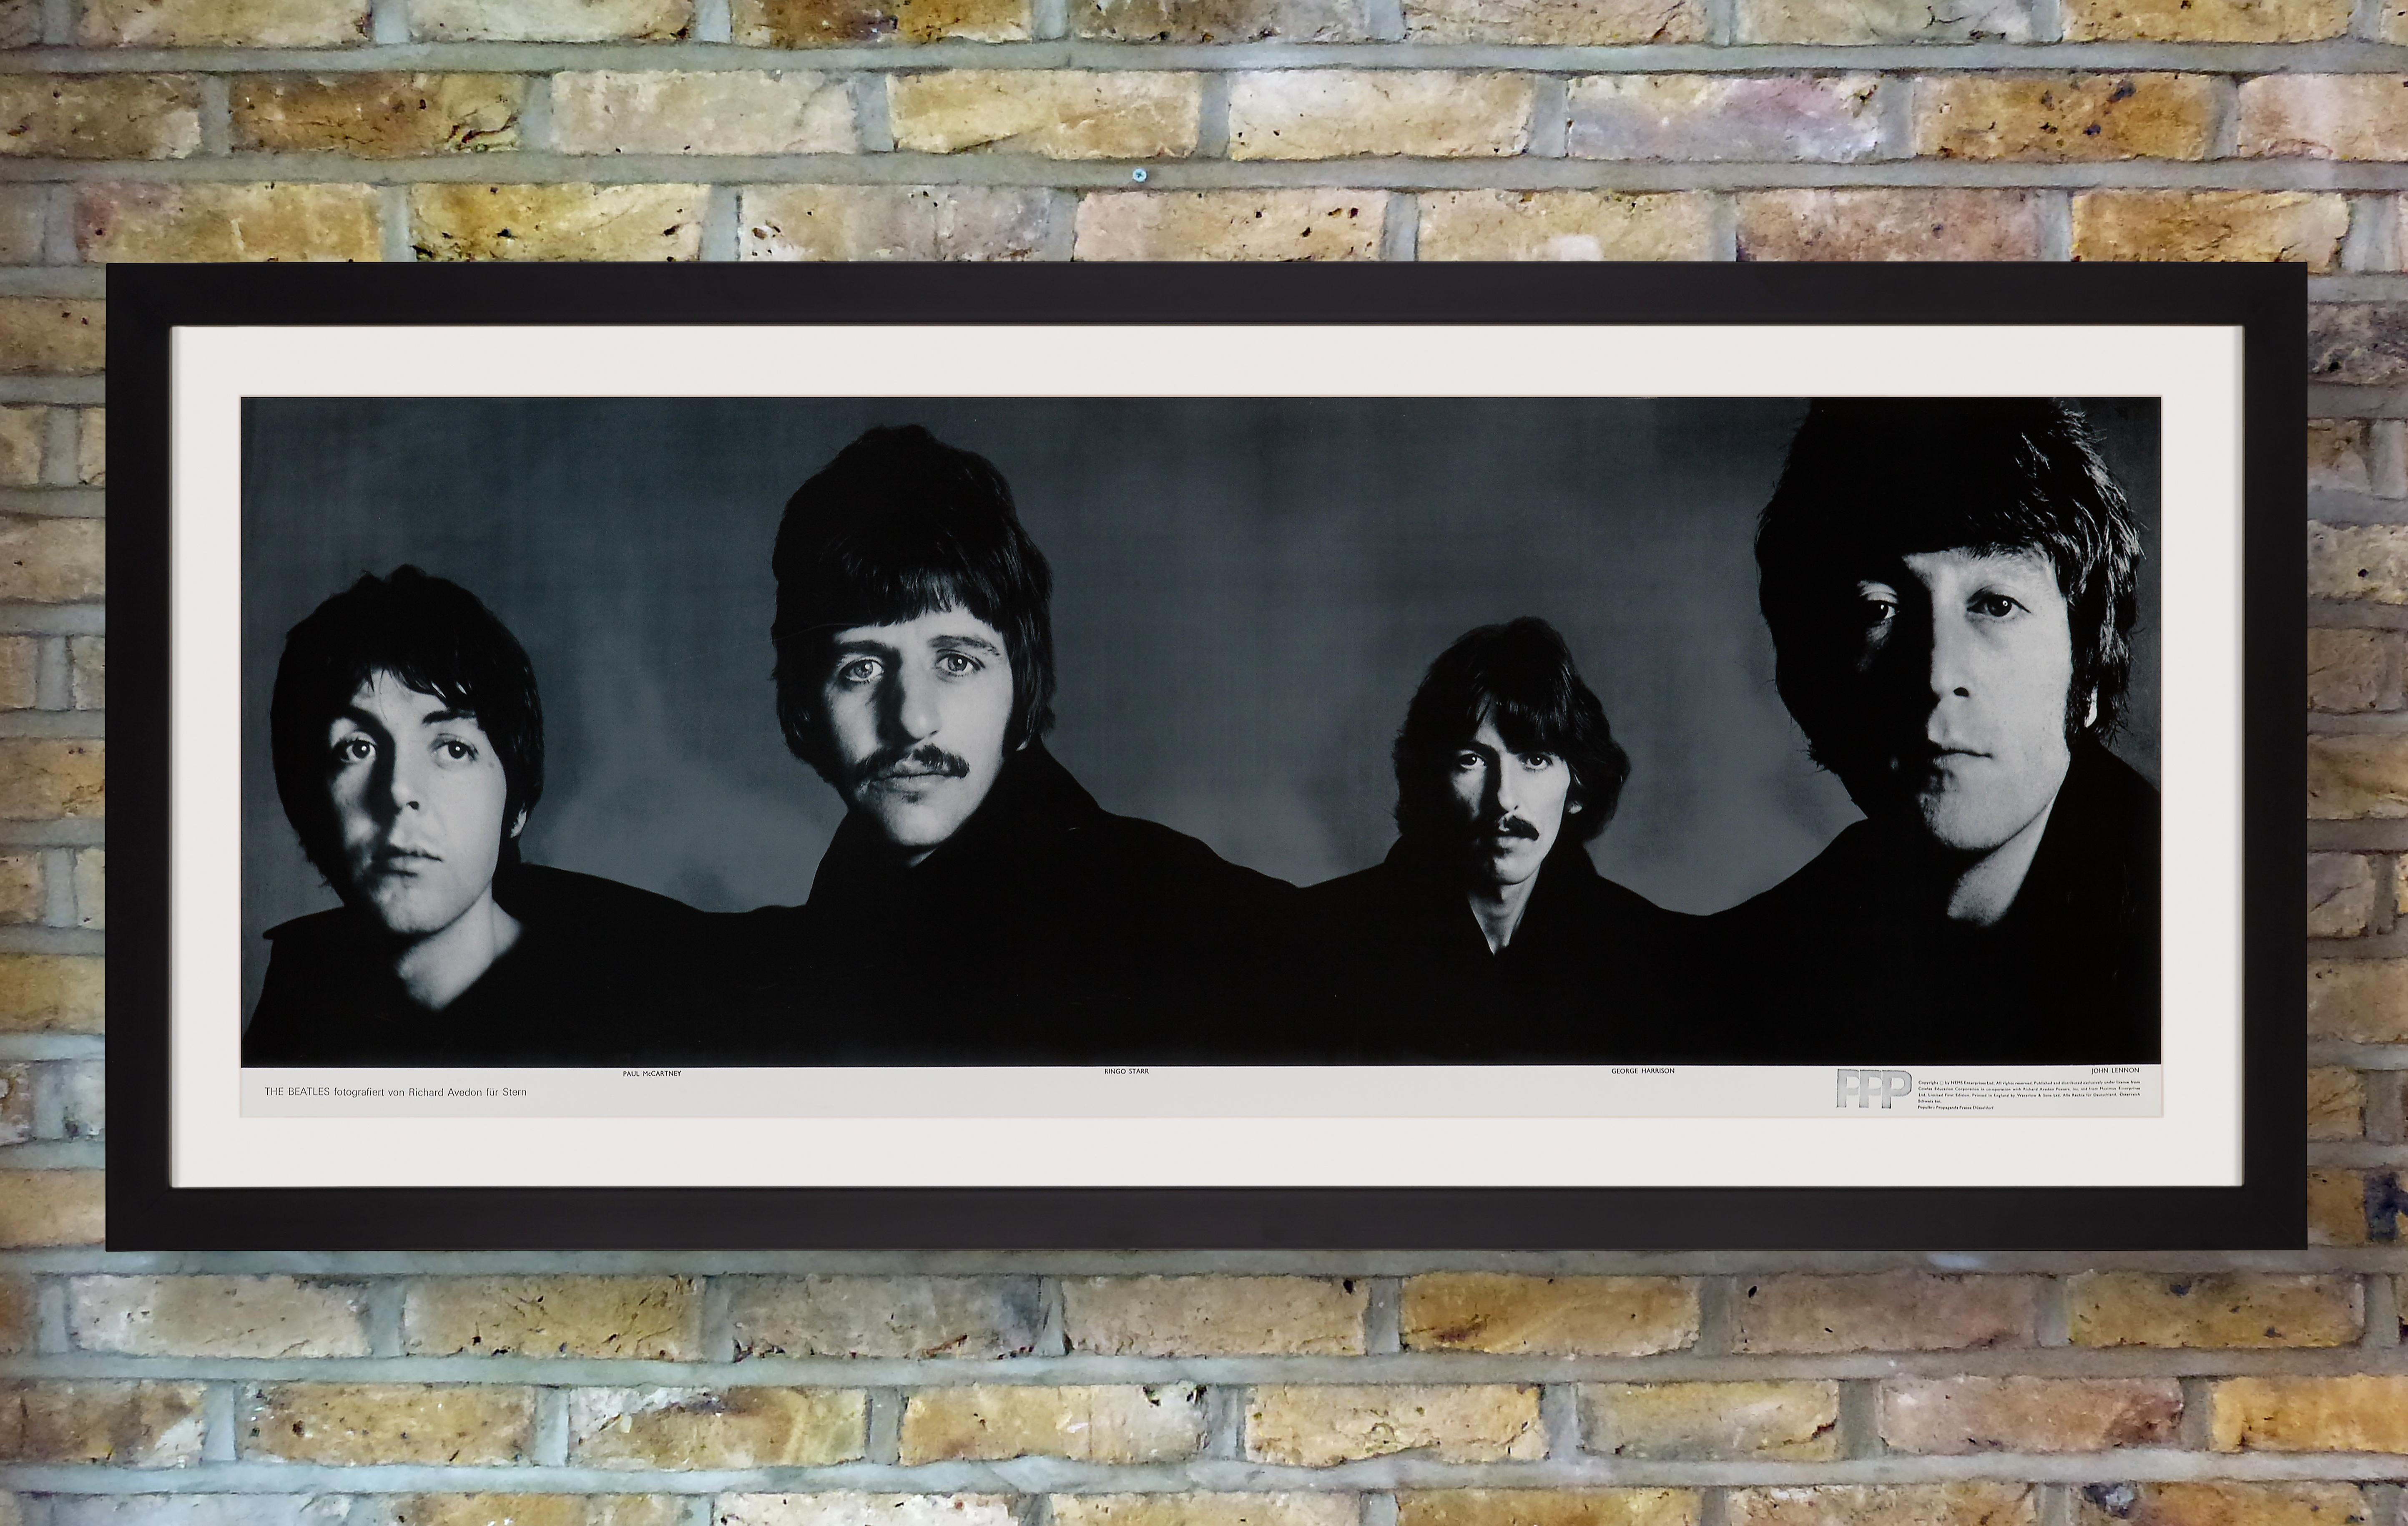 'The Beatles' Complete Set of Five Promotional Posters by Richard Avedon, 1967 For Sale 7